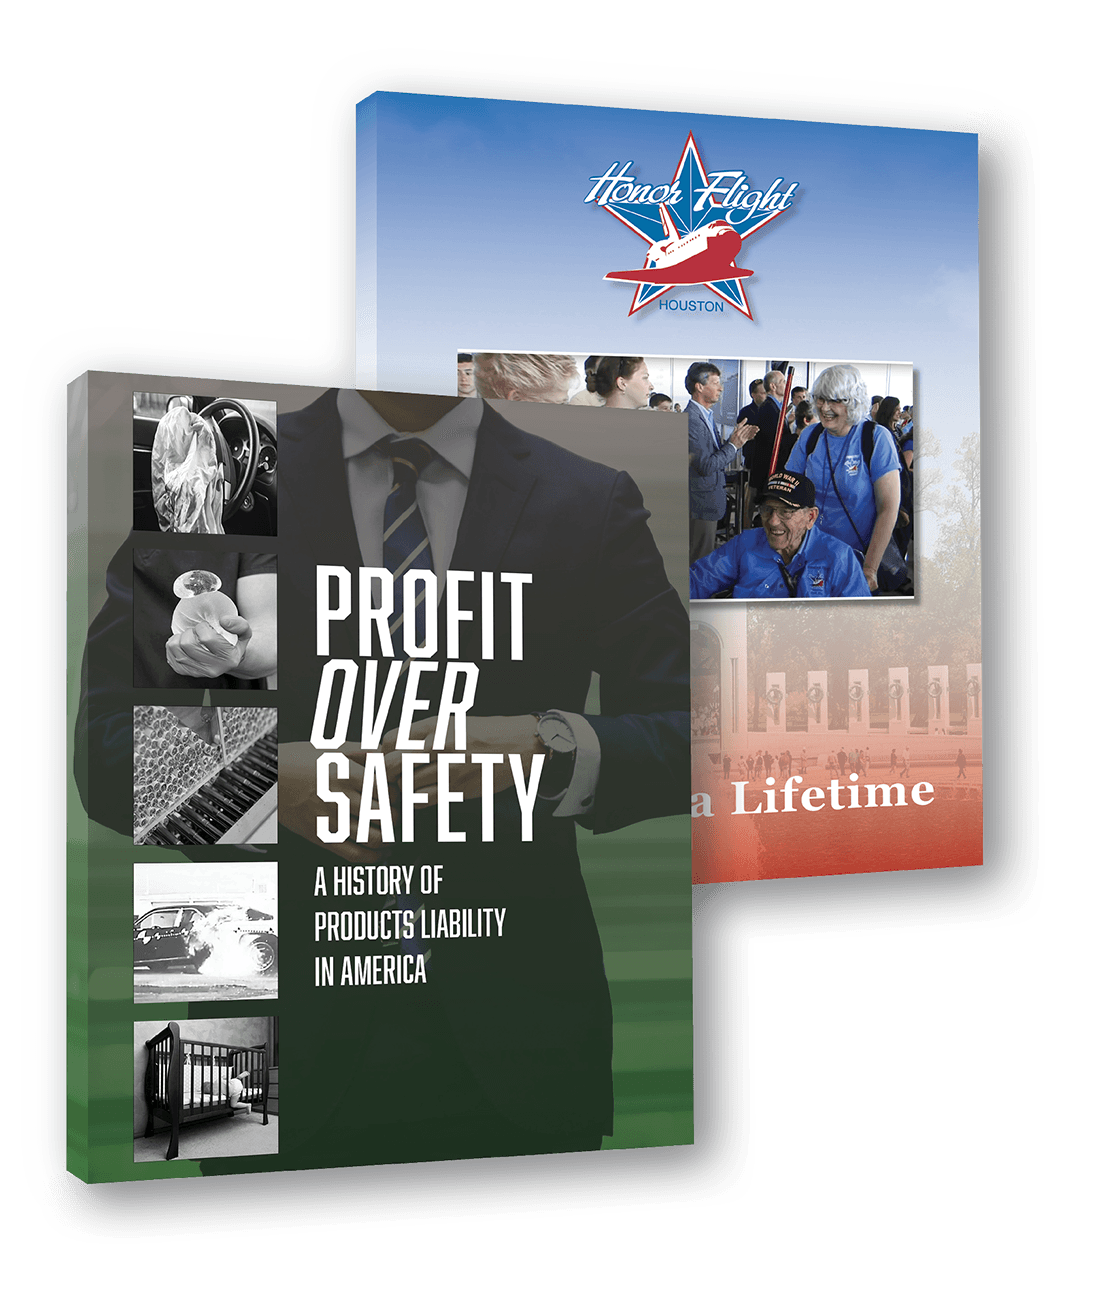 Profit Over Safety and Honor Flight Houston video covers